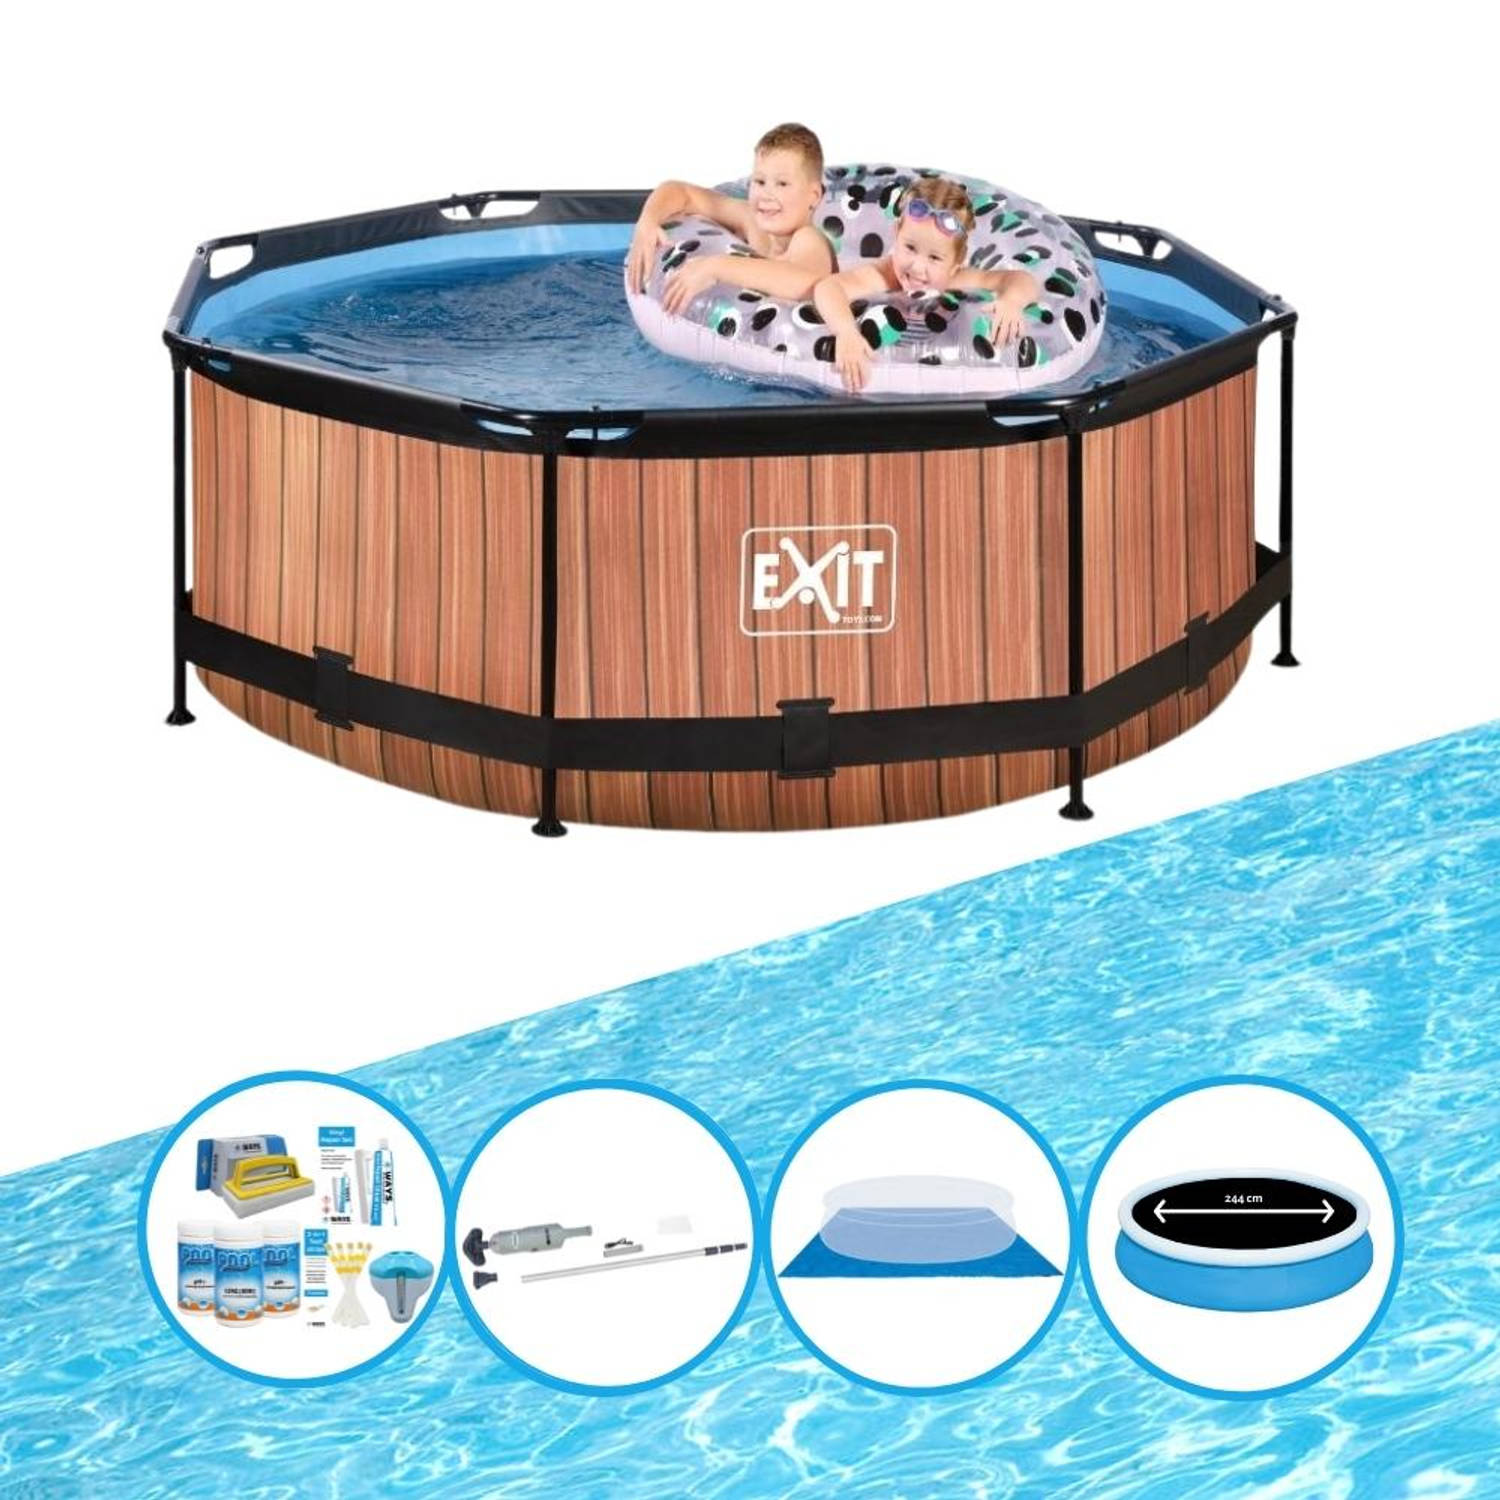 EXIT Zwembad Timber Style - Frame Pool ø244x76cm - Plus bijbehorende accessoires